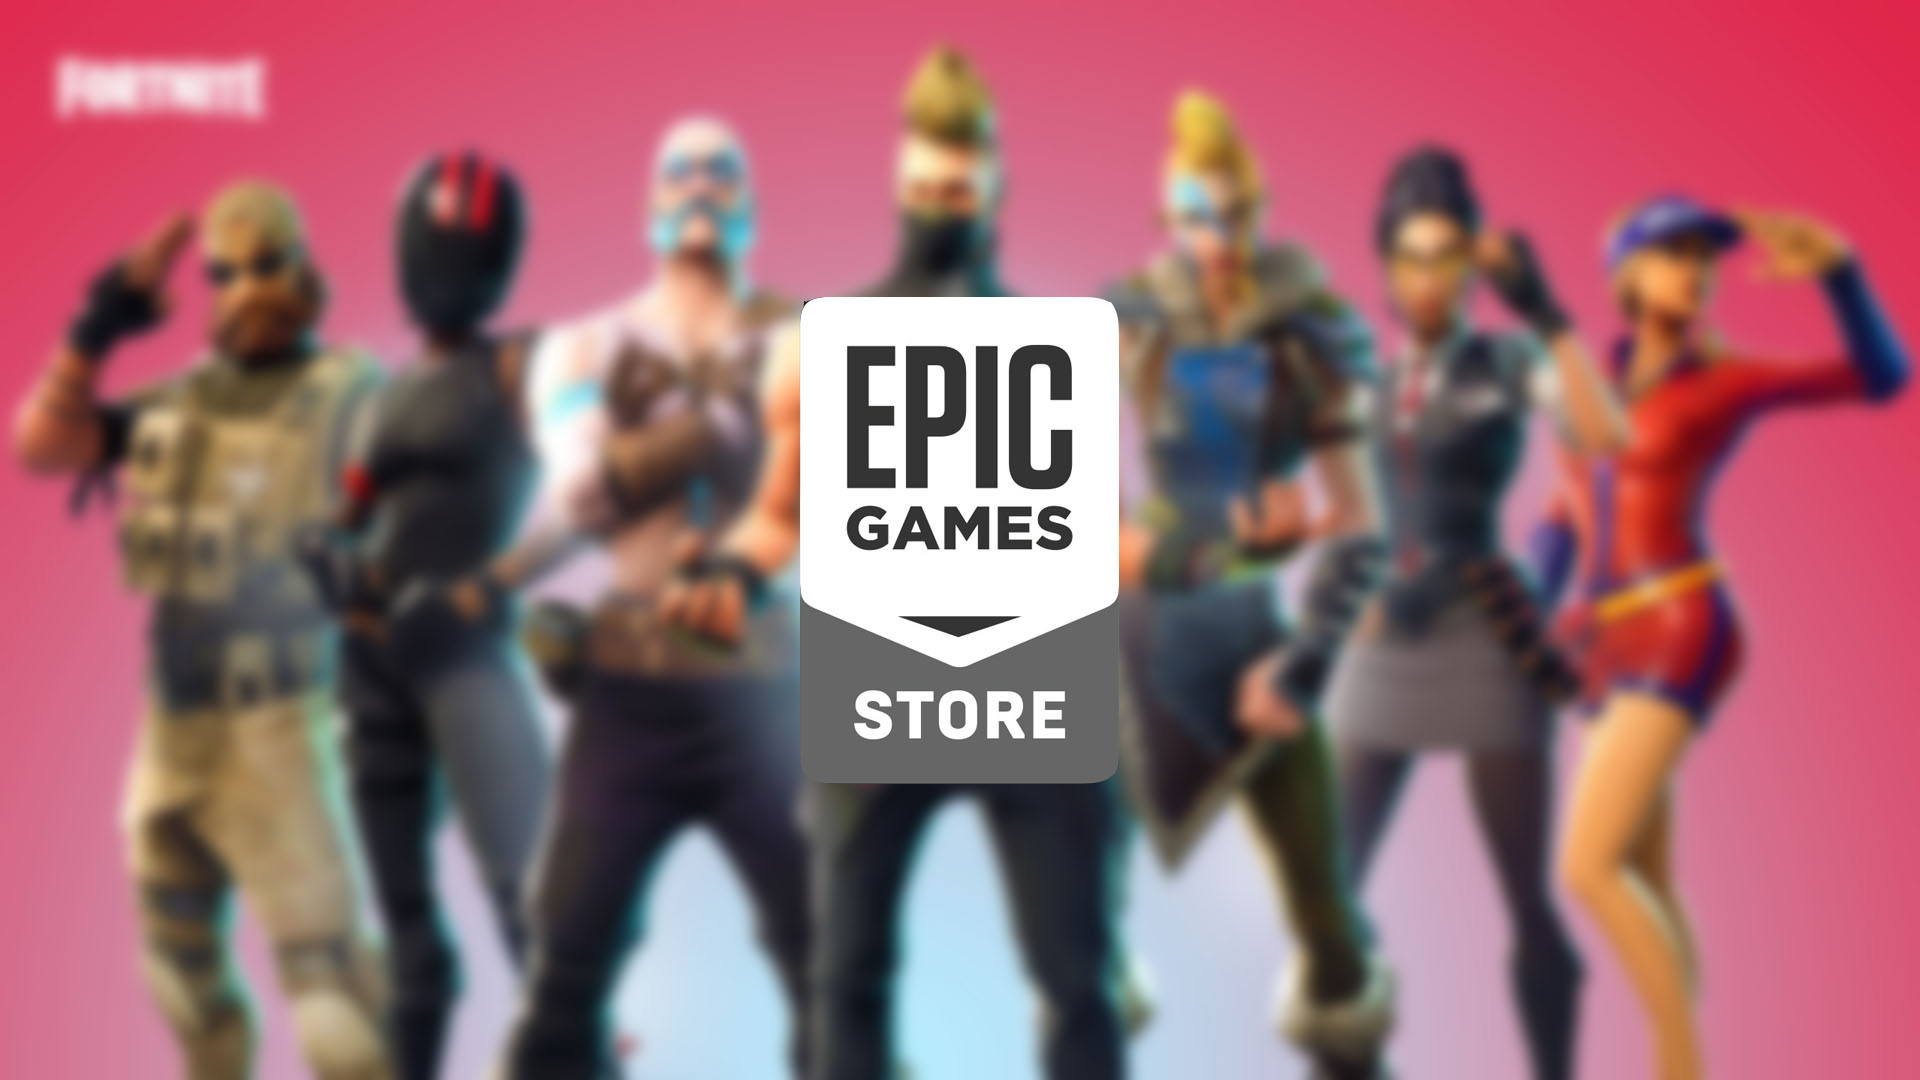 epic games store 12 days of free games